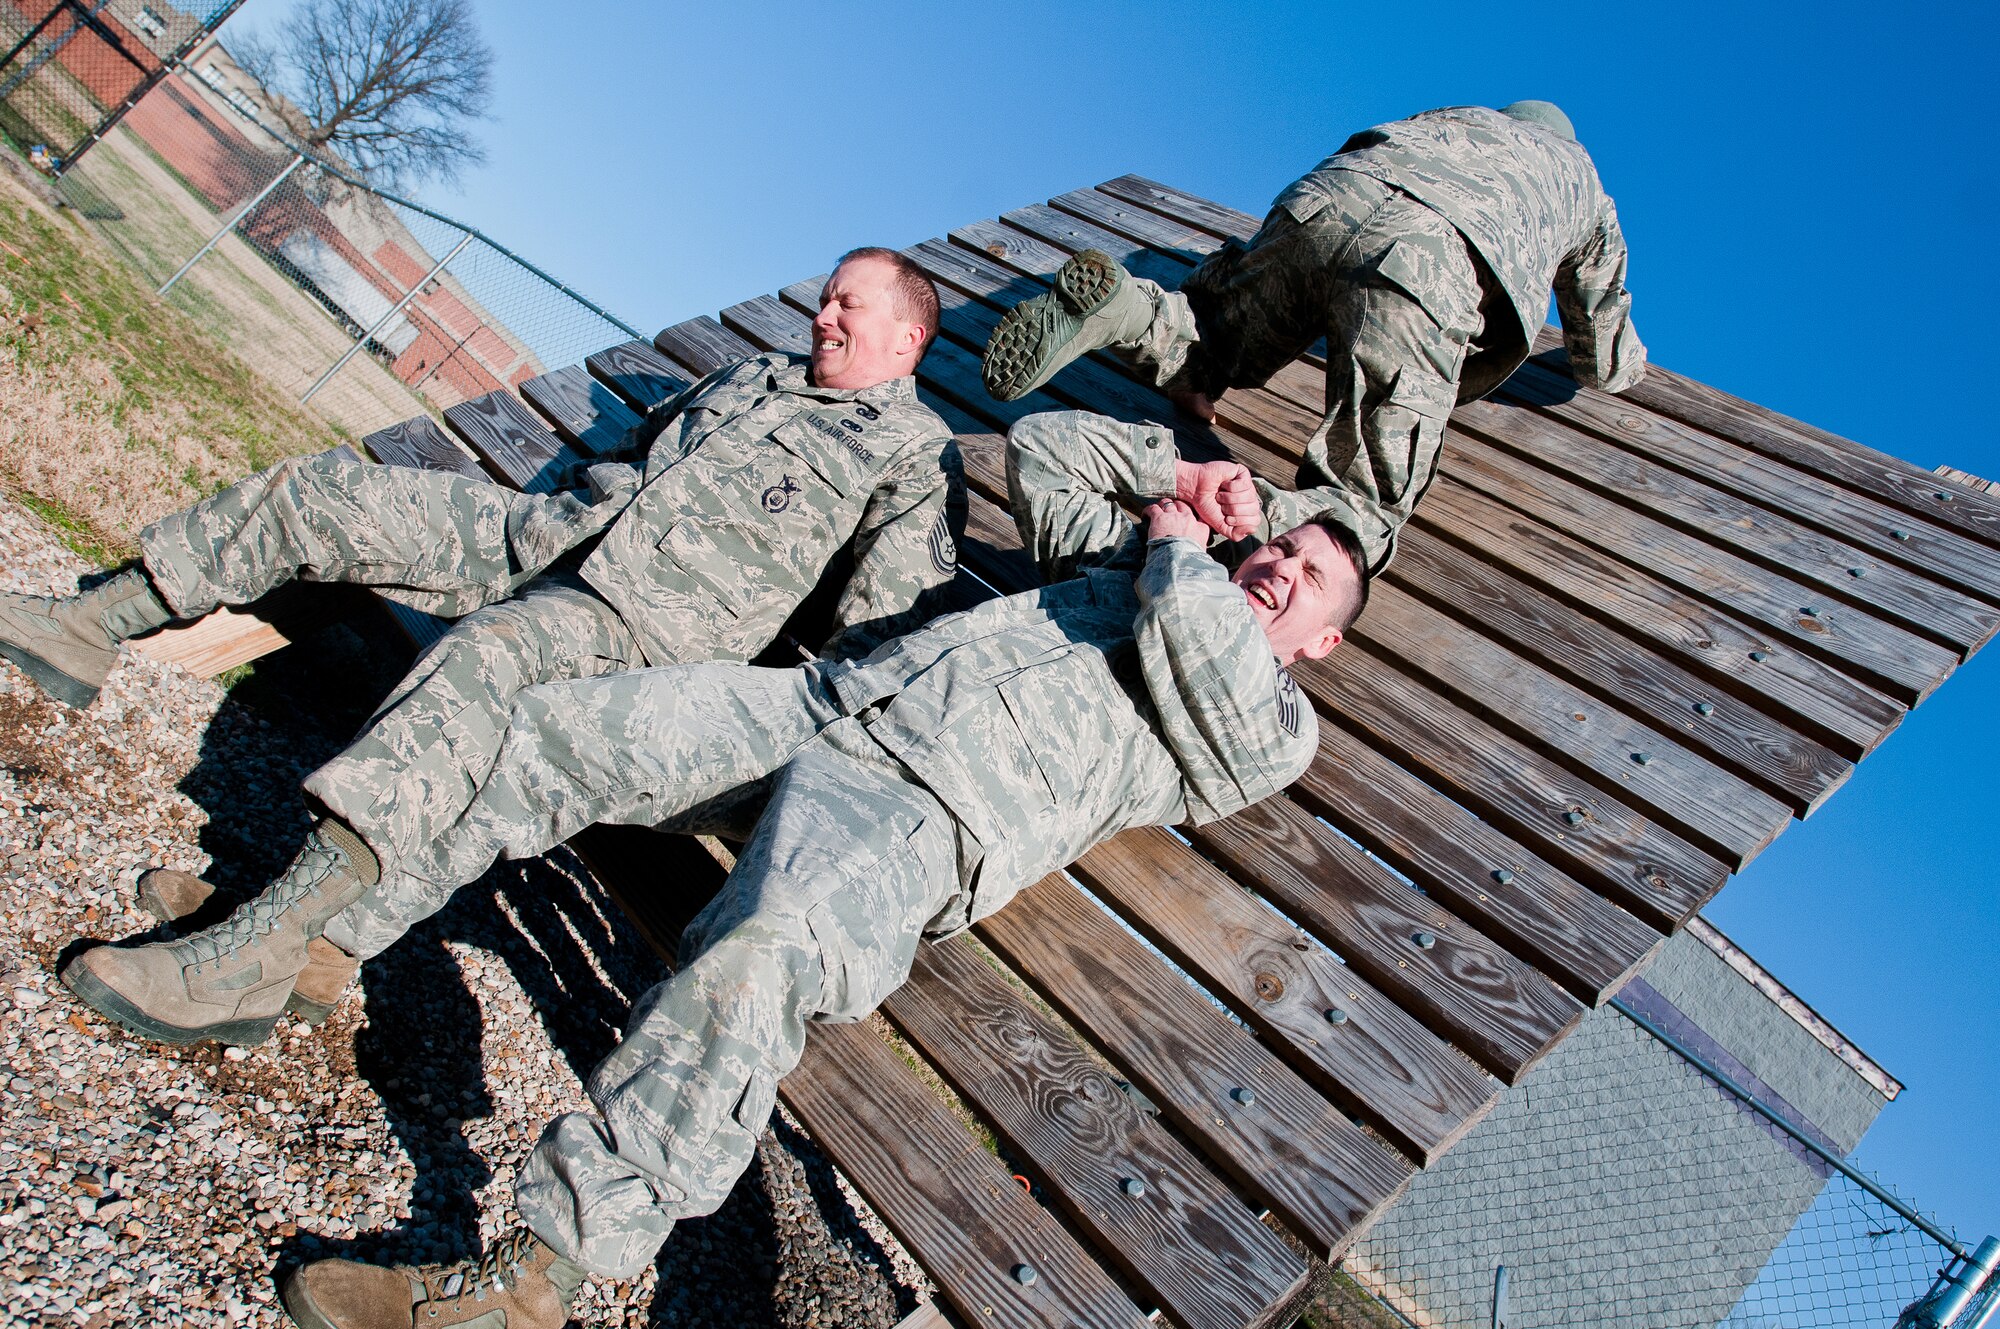 Staff Sgt. Ed Nooning and Master Sgt. Josh Devine, members of the Kentucky Air National Guard's 123rd Security Forces Squadron, help Tech. Sgt. Jesse Smith over an obstacle at Southern High School in Louisville, Ky., on Dec. 10, 2011. Airmen from the 123rd SFS were at the high school to use the Junior ROTC obstacle course for a team-building exercise as part of Wingman Day activities. (U.S. Air Force photo by Senior Airman Maxwell Rechel)